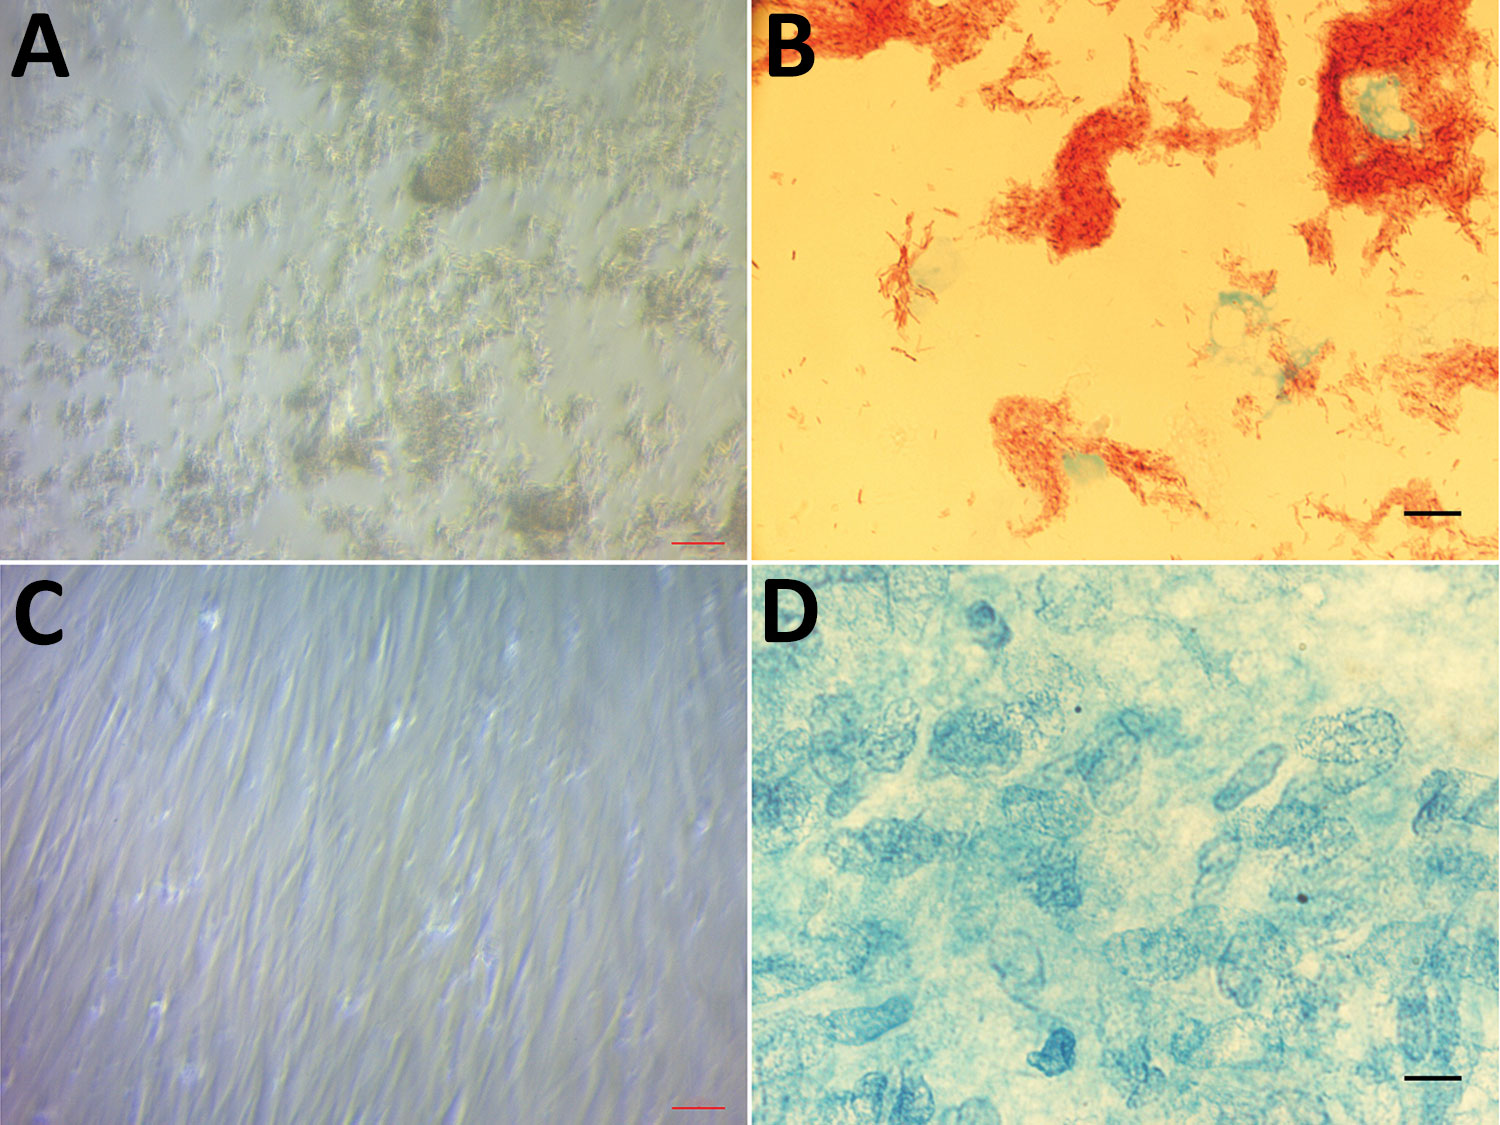 Light microscopic examination of human embryonic lung cells inoculated for 28 days from a clinical sample from a 47-year-old man with Pott’s disease and systemic tuberculosis, France. A) Cytopathic effect consisting of cell lysis caused by growing Mycobaterium tuberculosis. Original magnification ×200. B) M. tuberculosis mycobacteria observed after Ziehl-Neelsen staining. Original magnification ×1,000, by oil immersion. C) Absence of any cytopathic effect in negative control cell culture. Origin